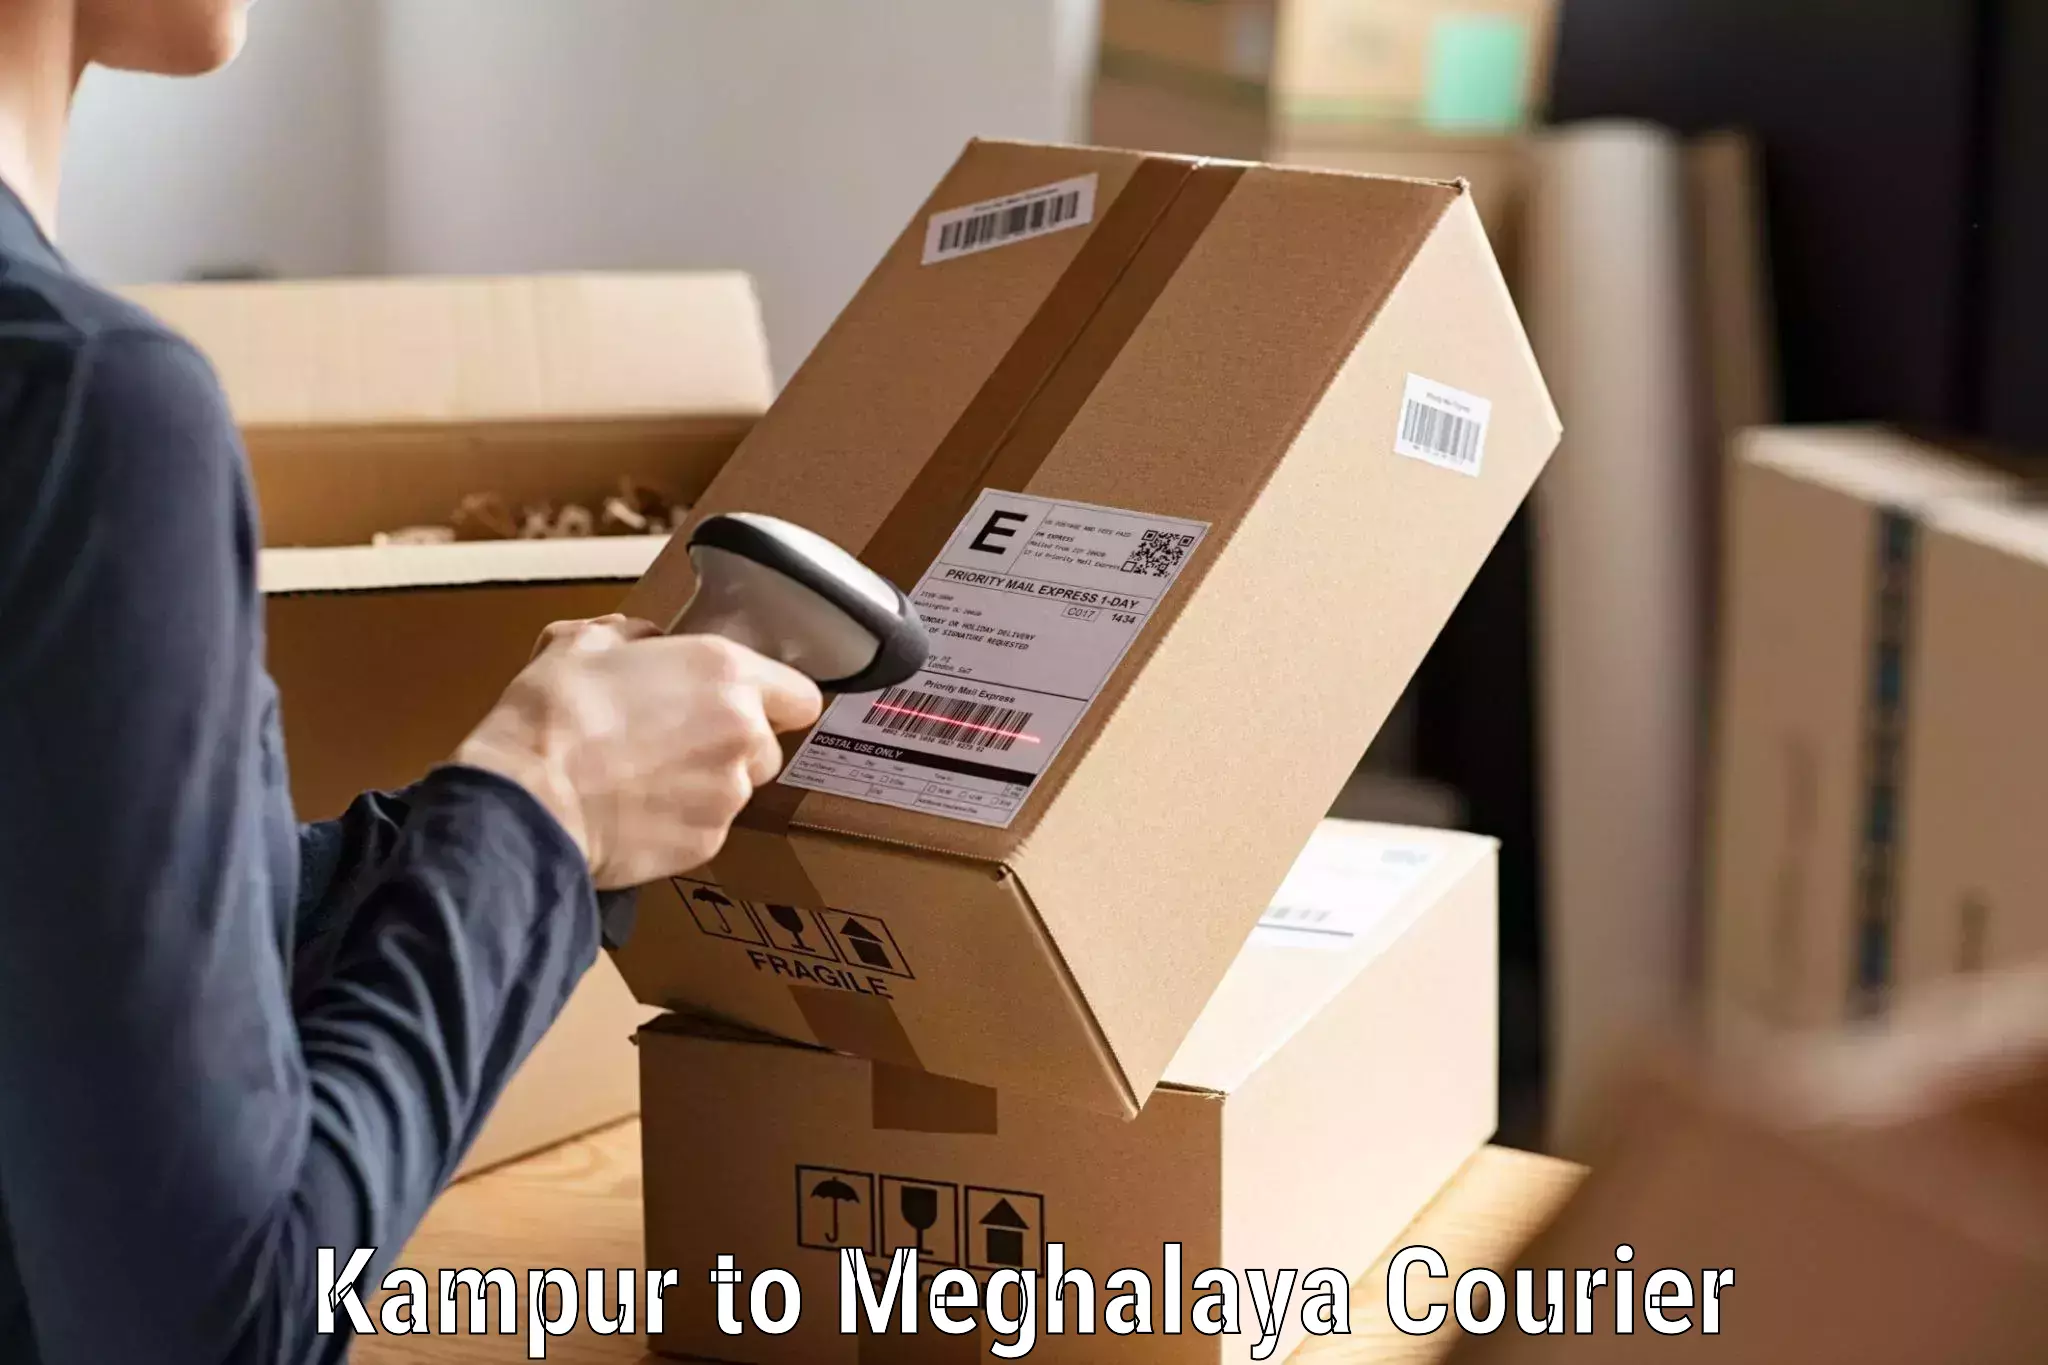 On-call courier service Kampur to Meghalaya